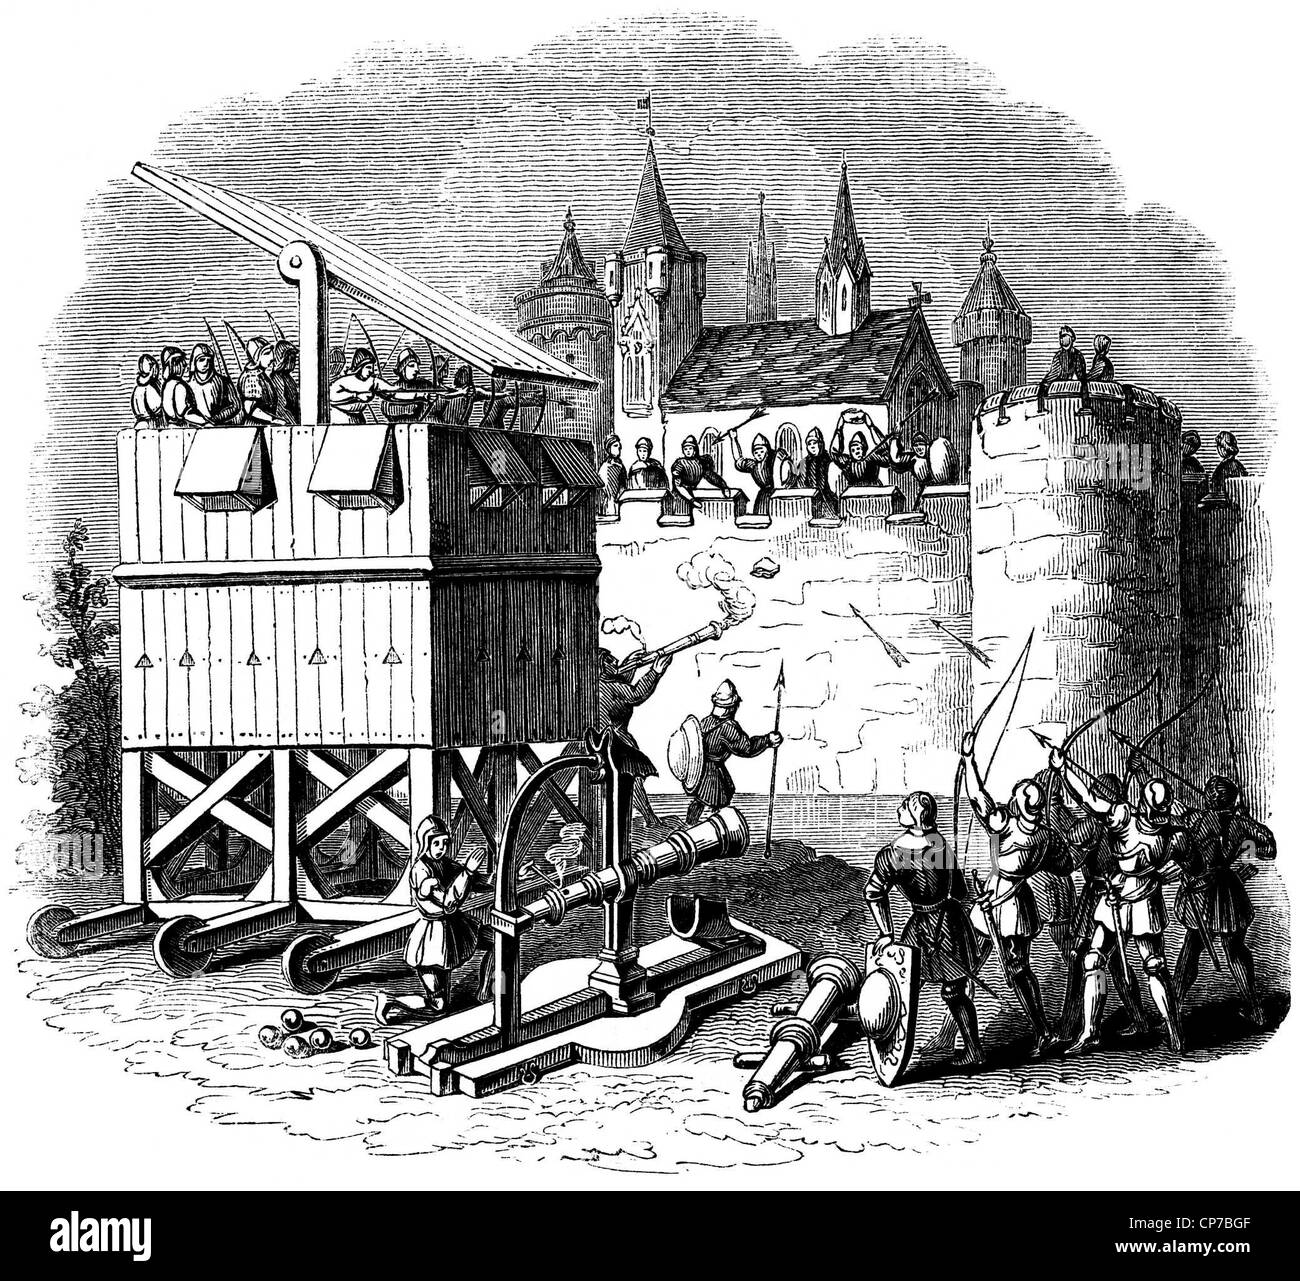 Medieval siege engine tower attacking castle. Stock Photo